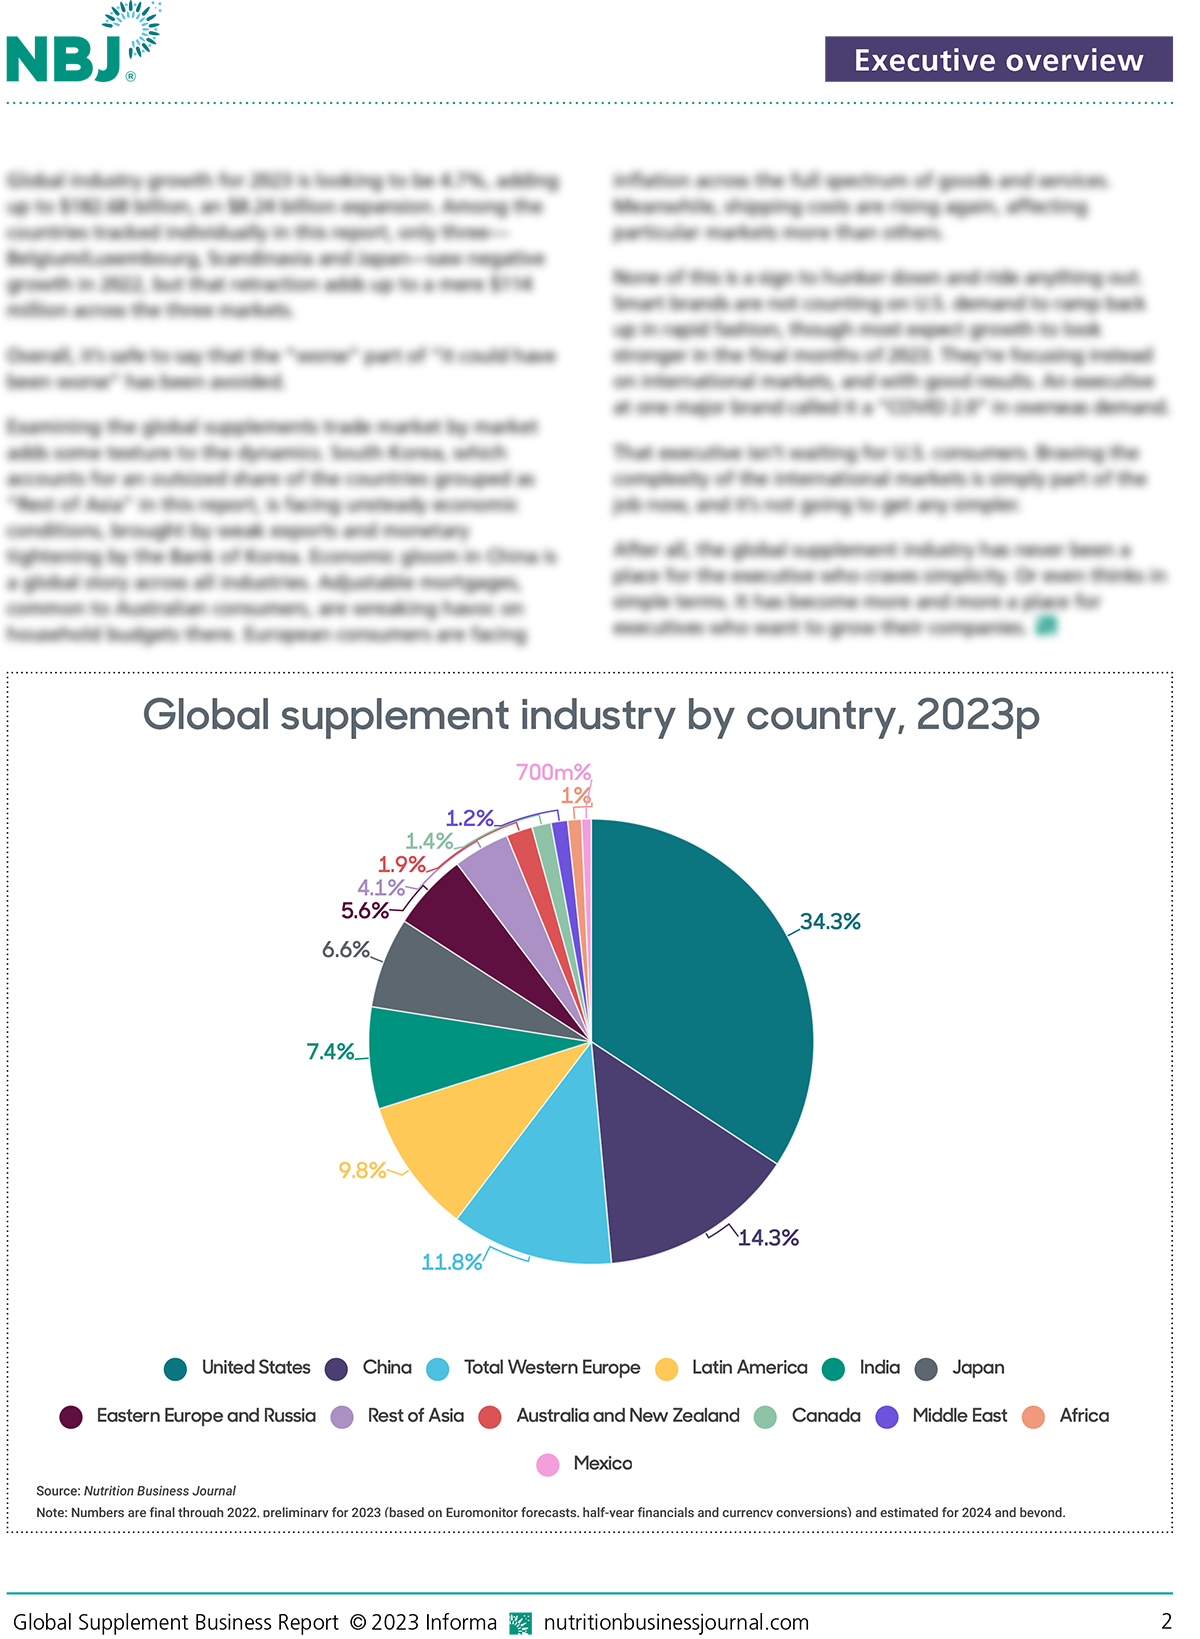 Global Supplement industry sales by country